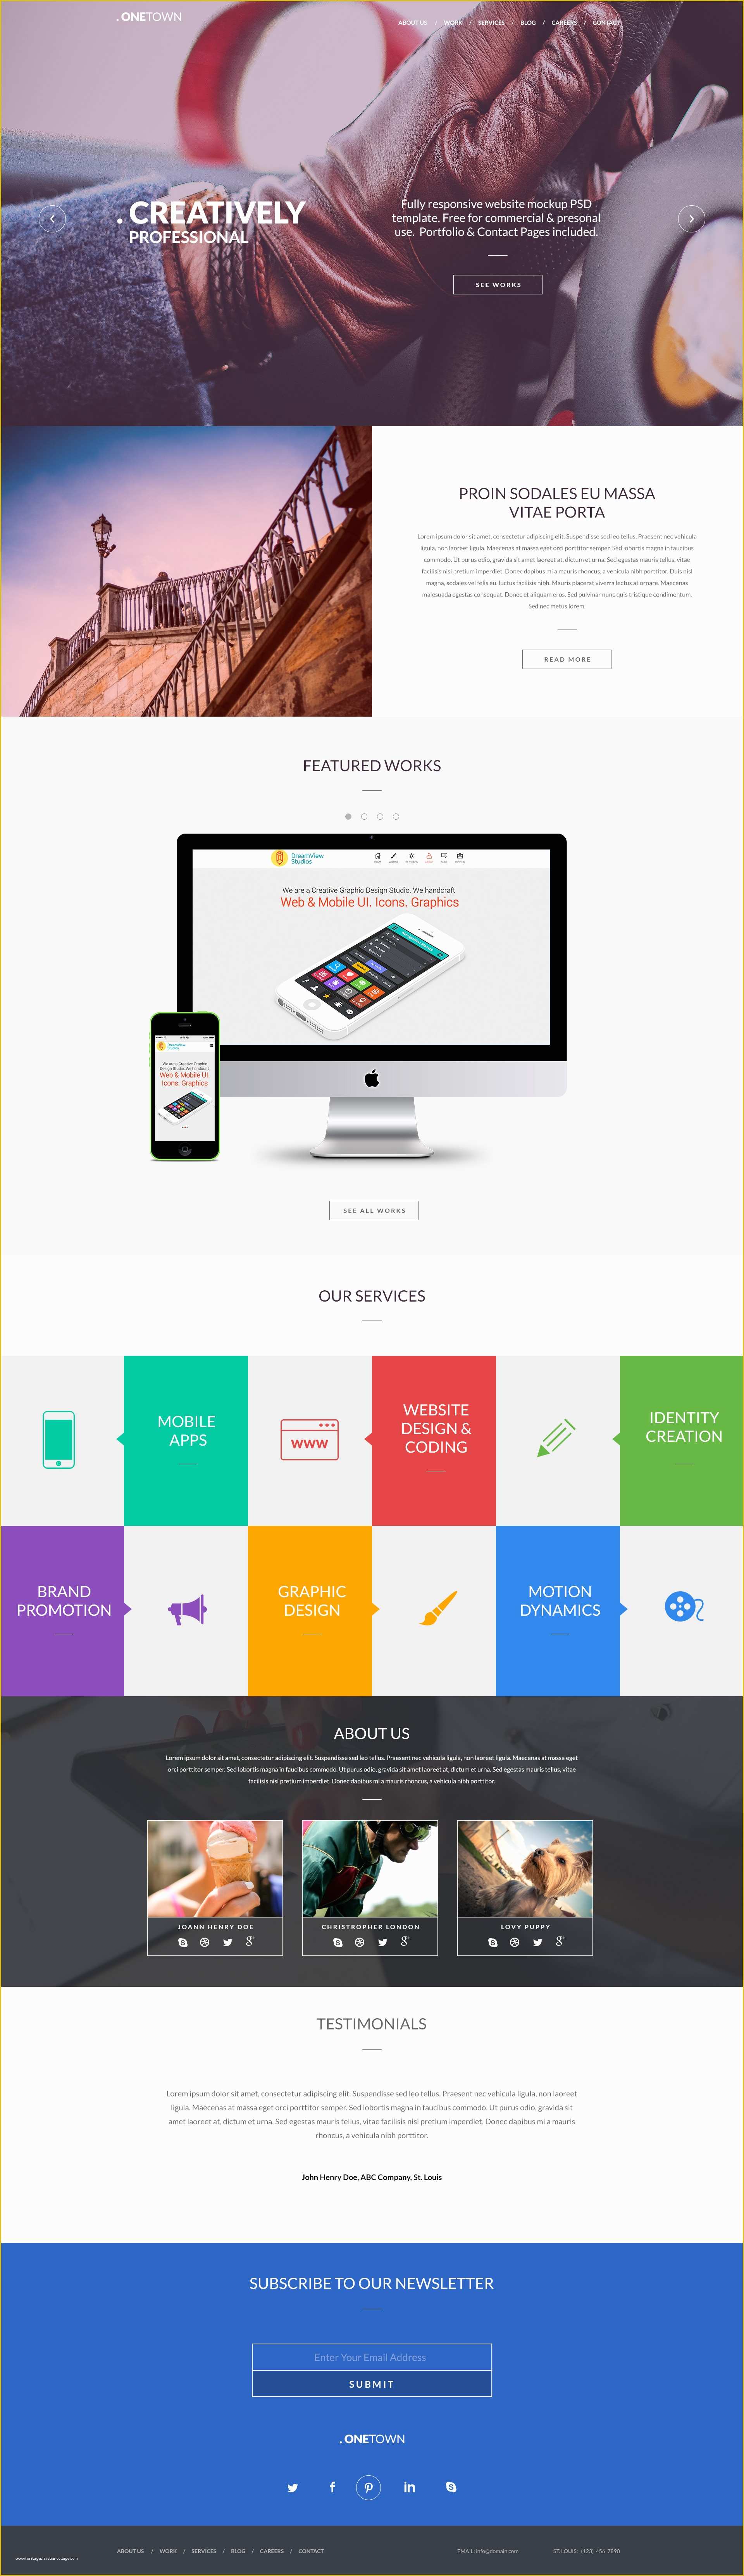  Responsive Website Templates Psd Free Download Of Free Responsive 